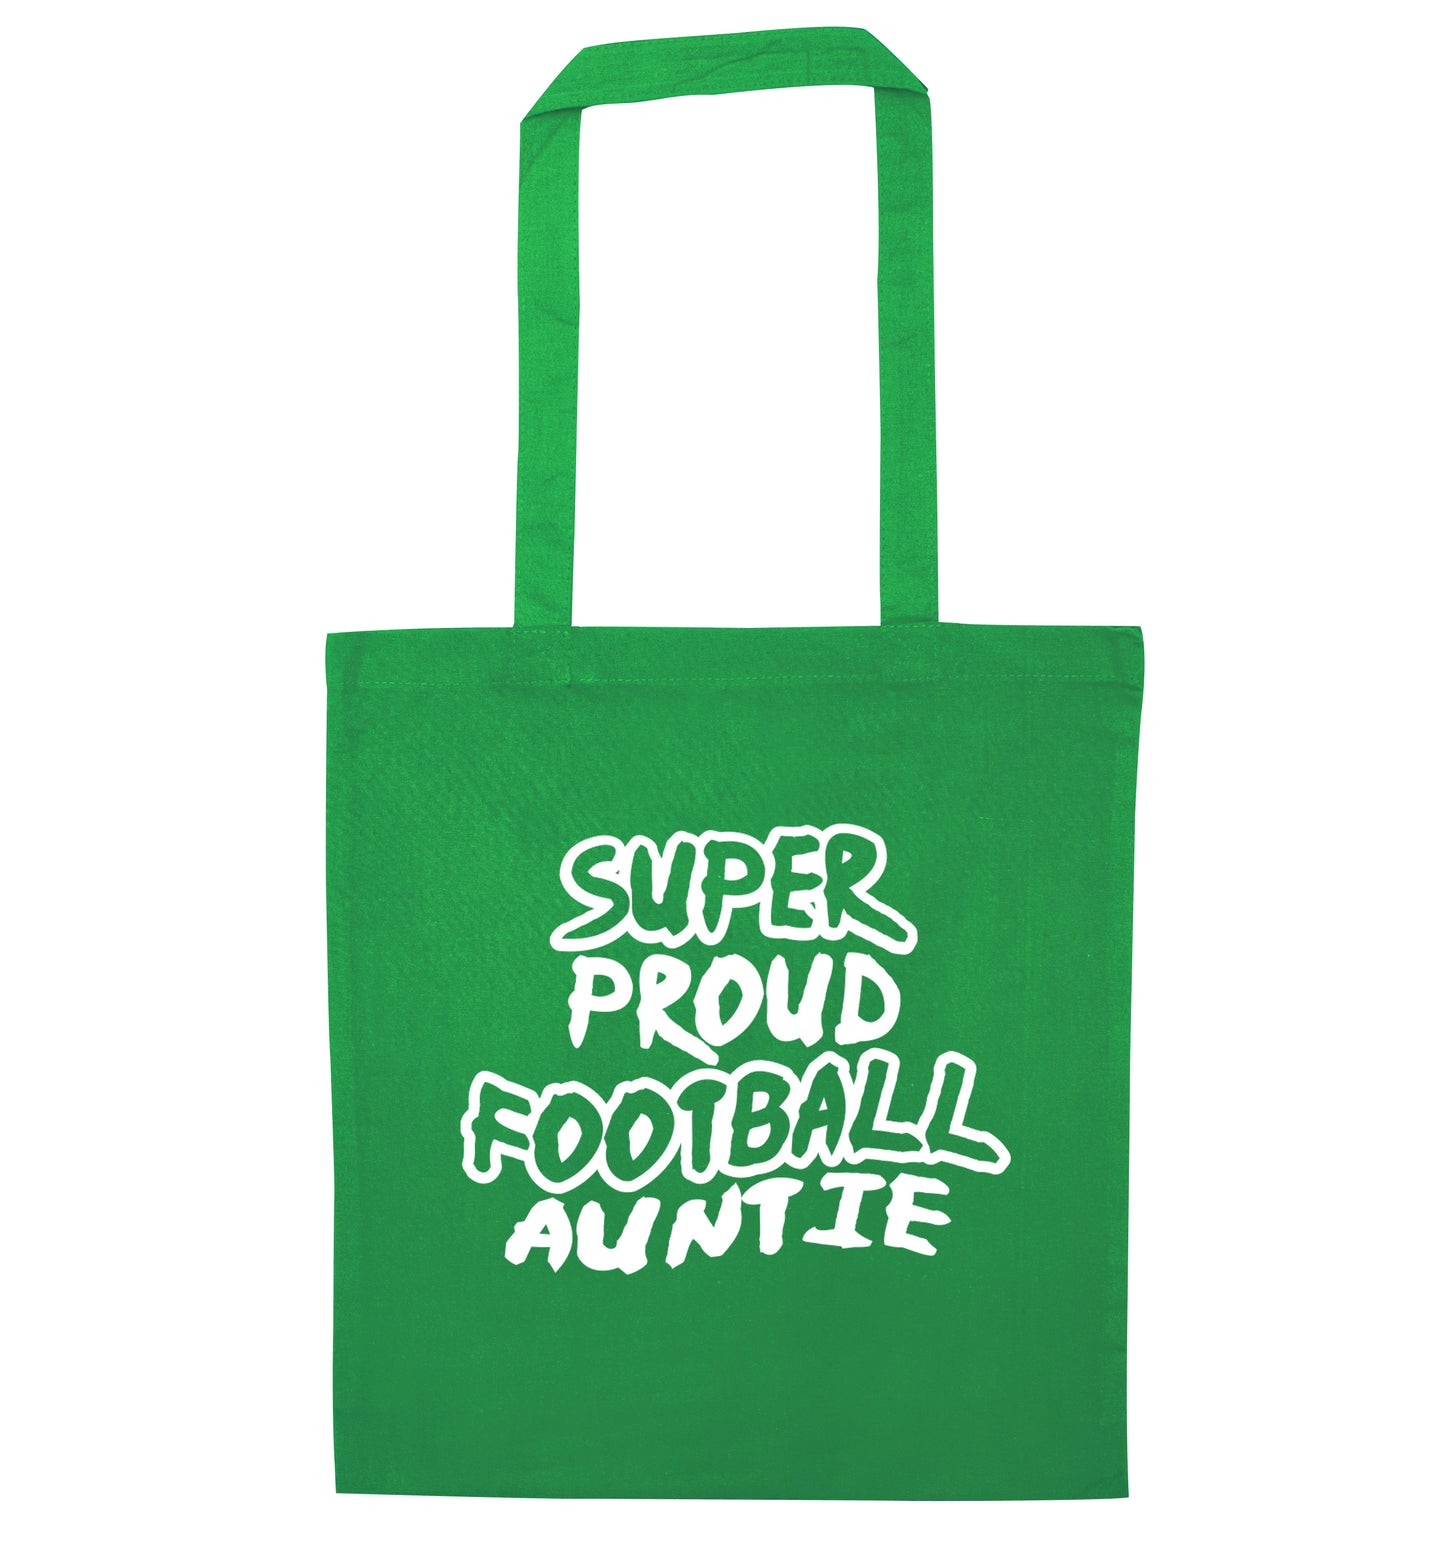 Super proud football auntie green tote bag